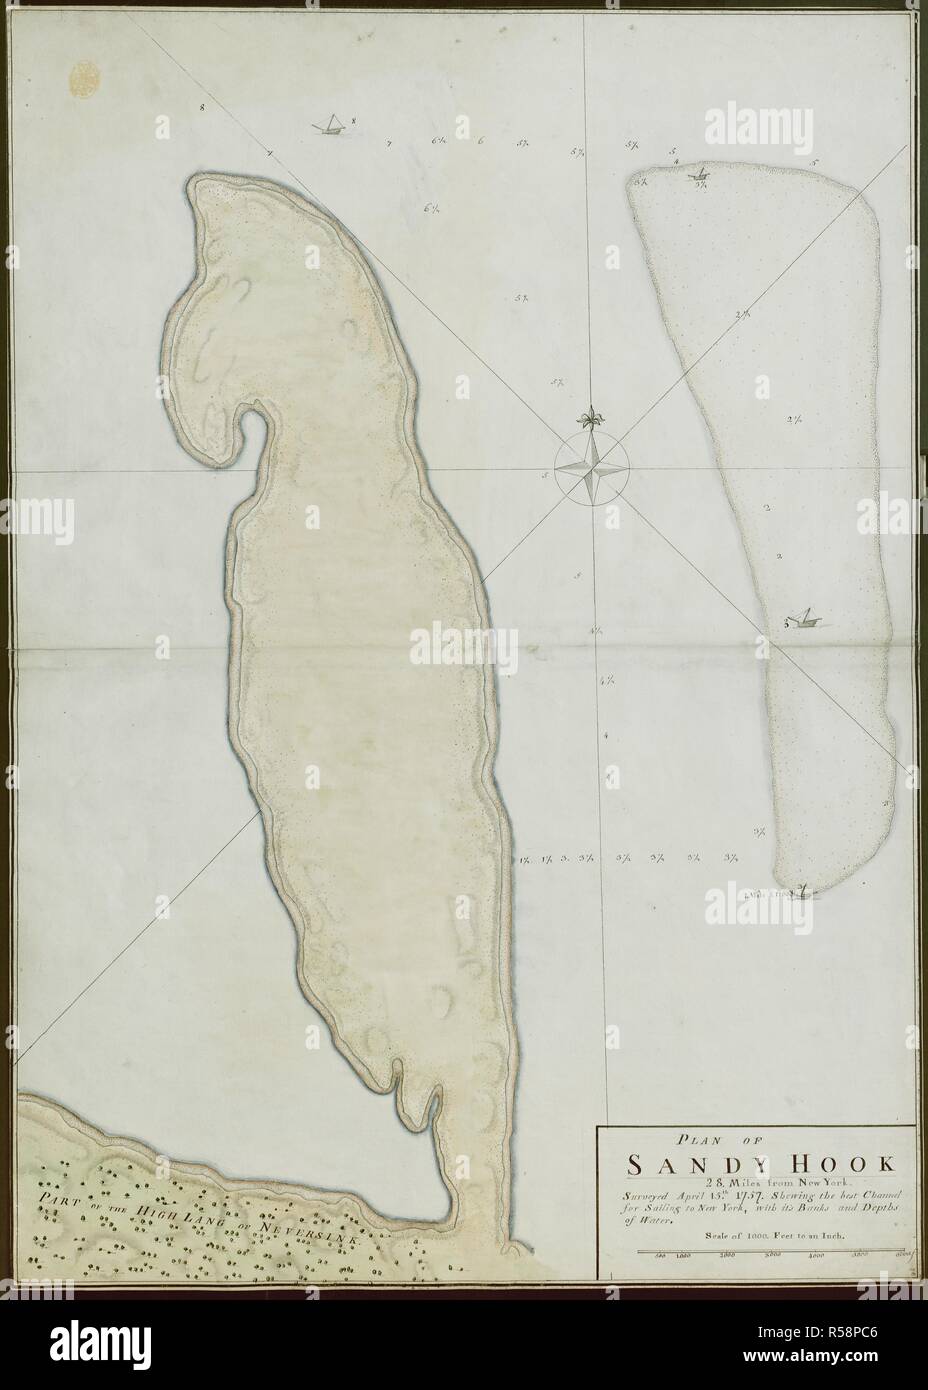 A plan of Sandy Hook, 28 miles from New York, surveyed April 15th, 1757: showing the best channel for sailing to New York, with its banks and depths of water. PLAN OF SANDY HOOK 28. Miles from New York. [New York?] : [producer not identified], 1757. Source: Maps K.Top.122.28. Language: English. Stock Photo